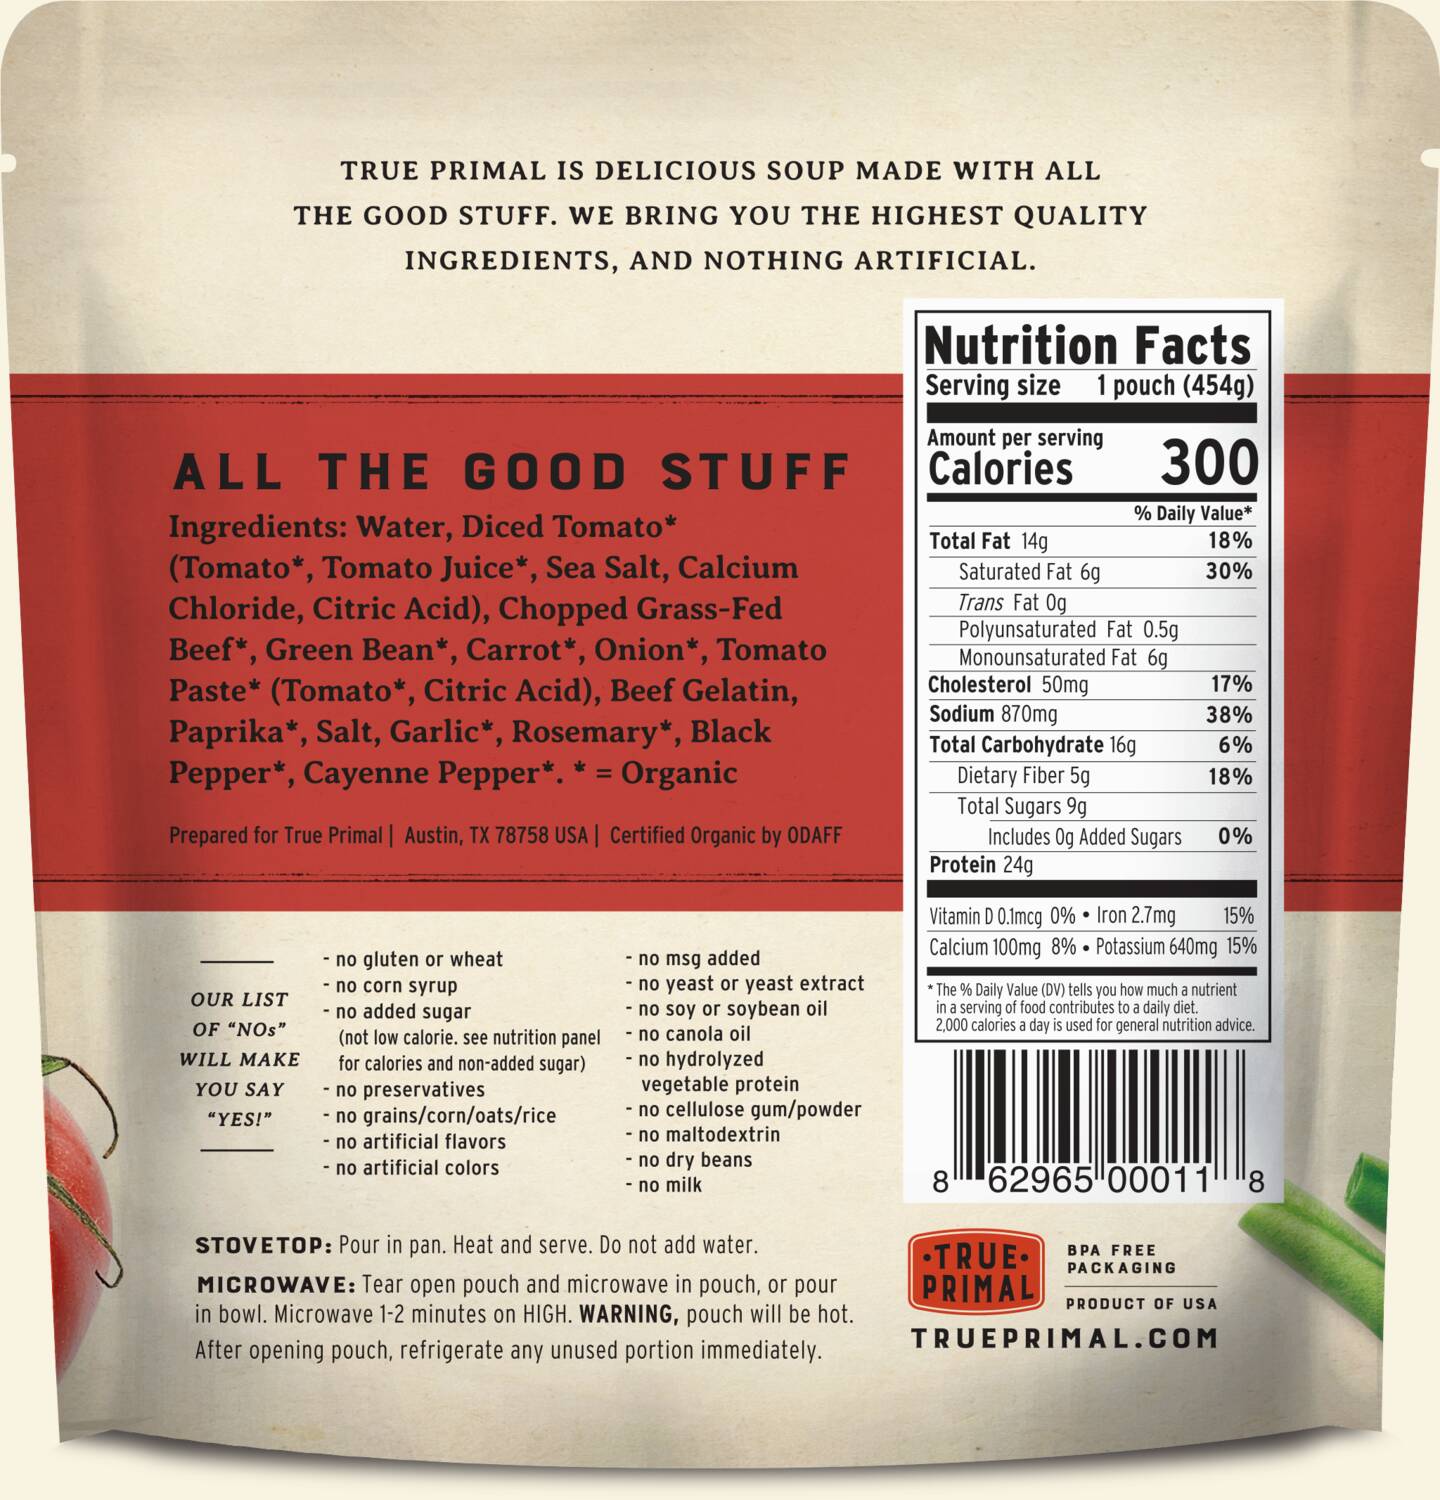 True Primal Beef and Vegetable Organic Soup in pouch, back of label. UPC: 862965000118.